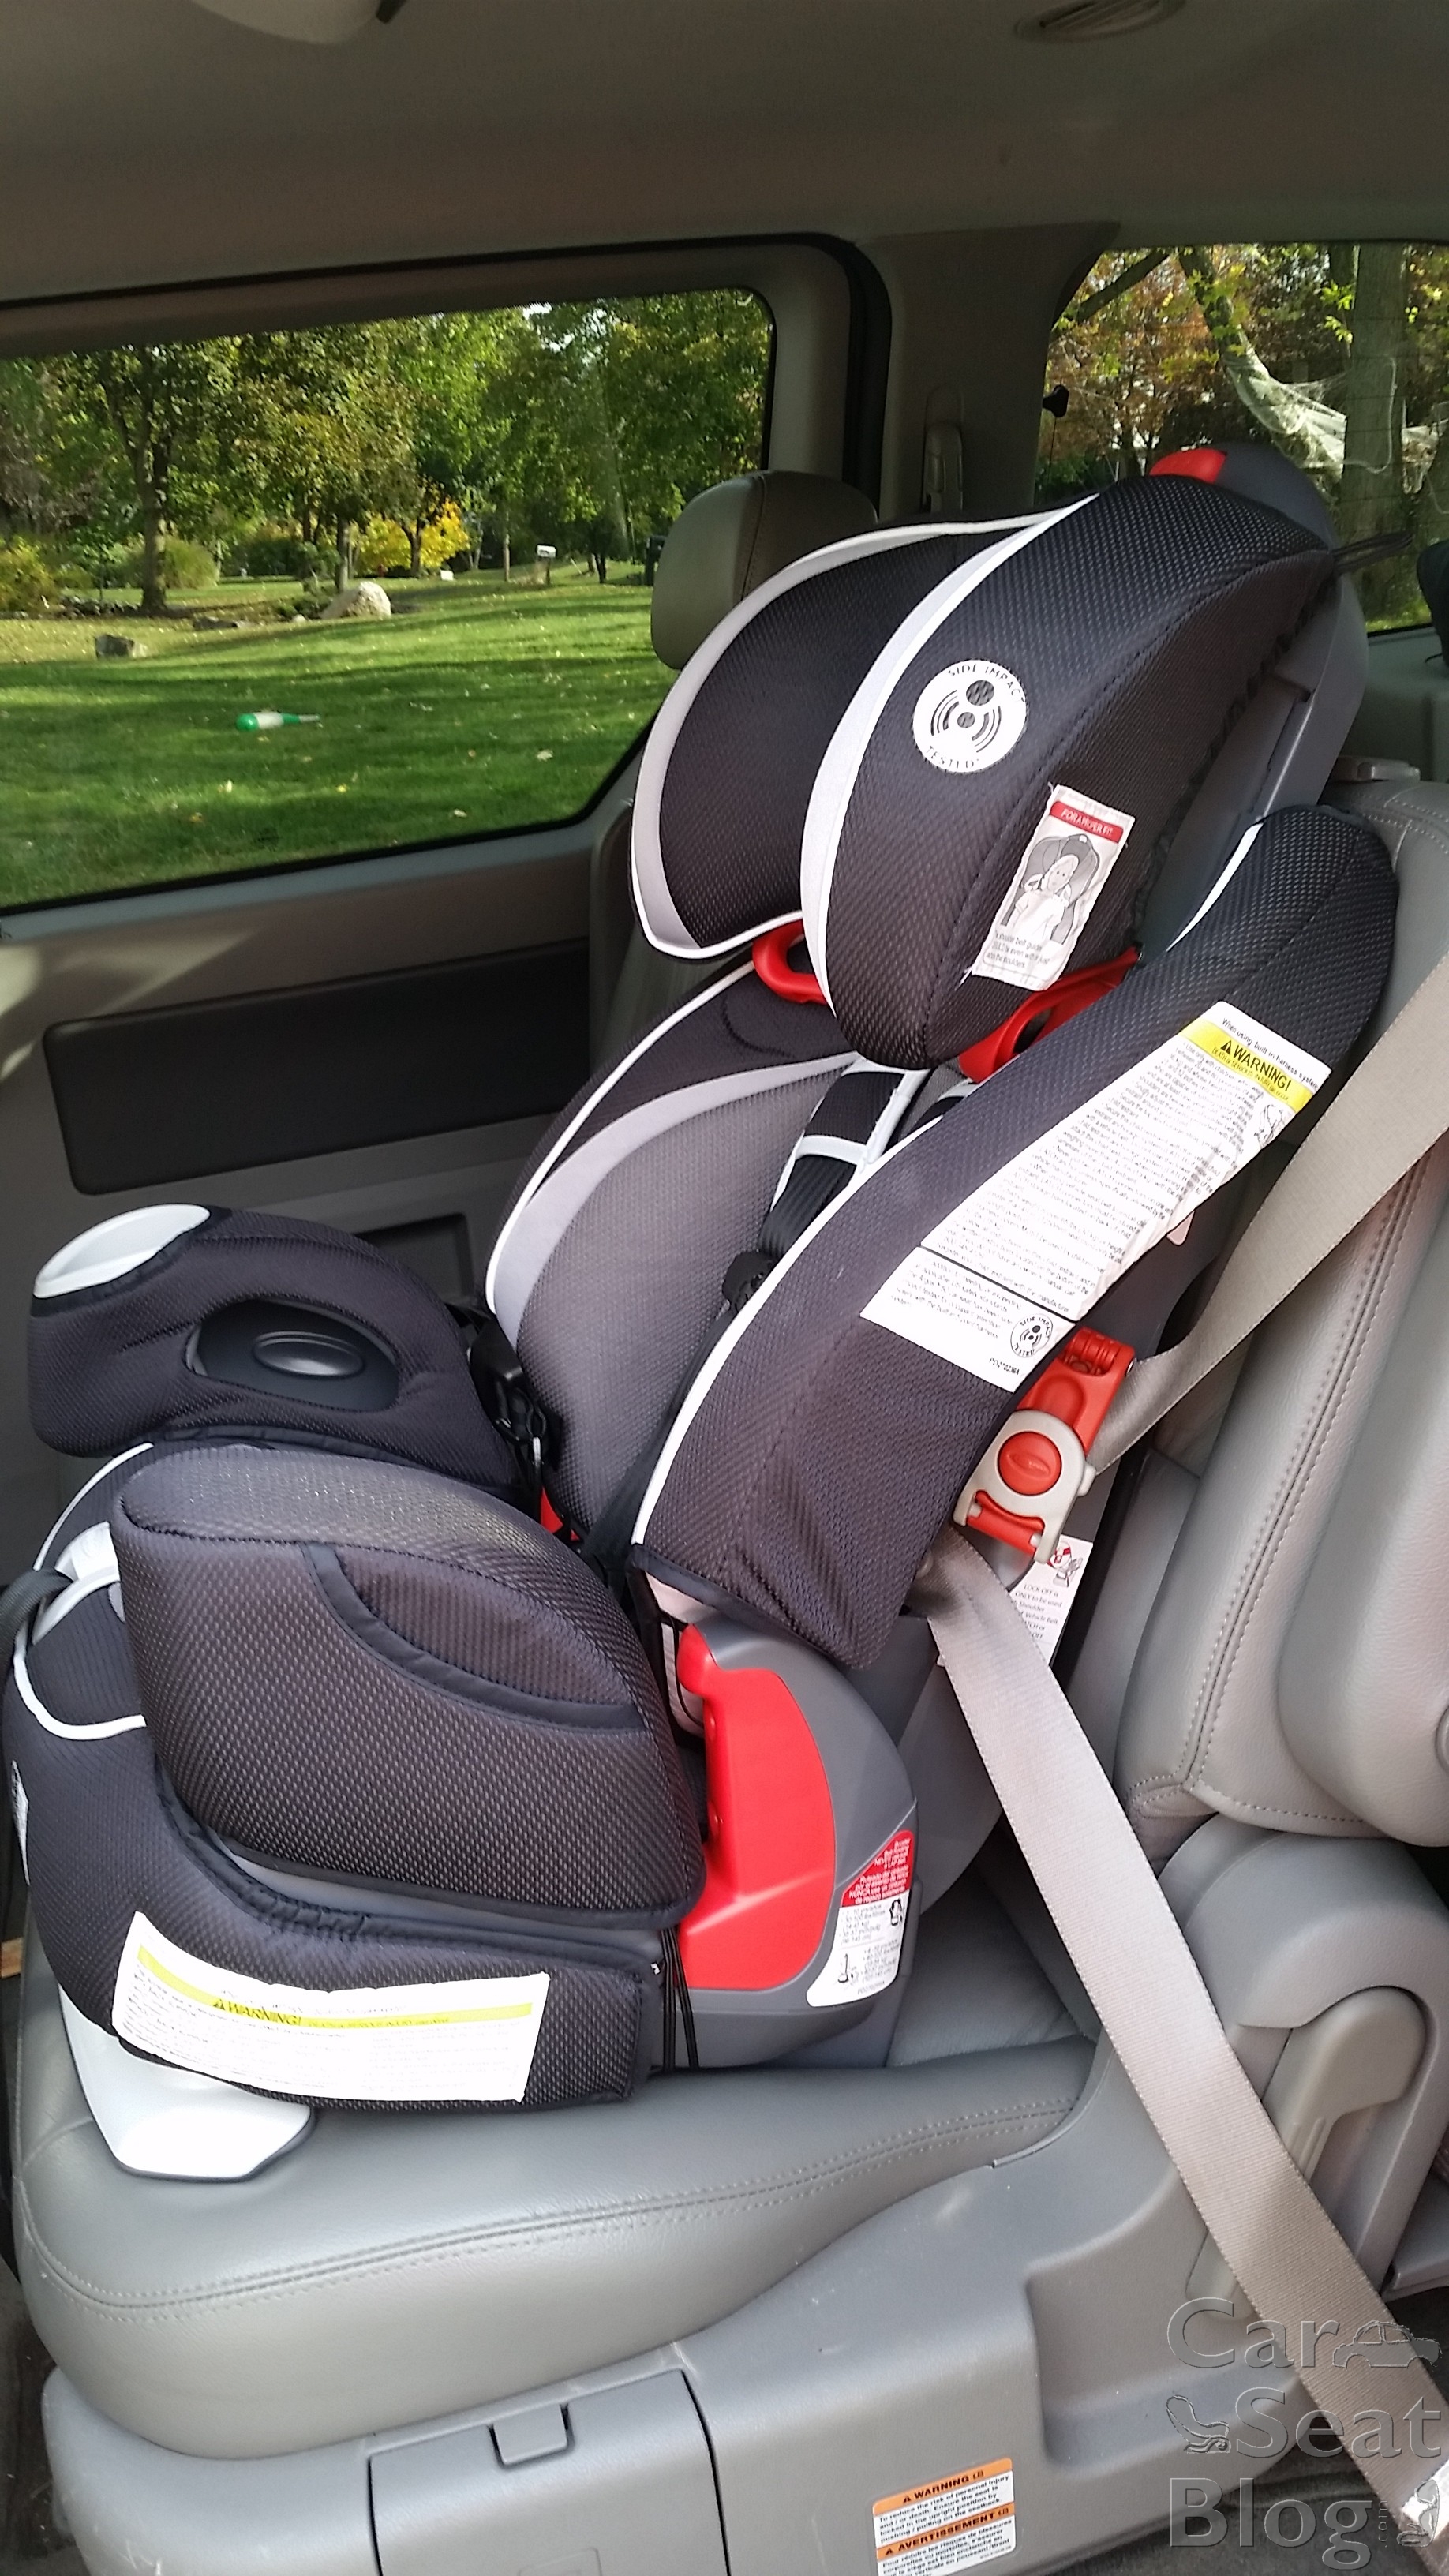 Lockoffs What You Need To Know Which Carseats Have Them Carseatblog